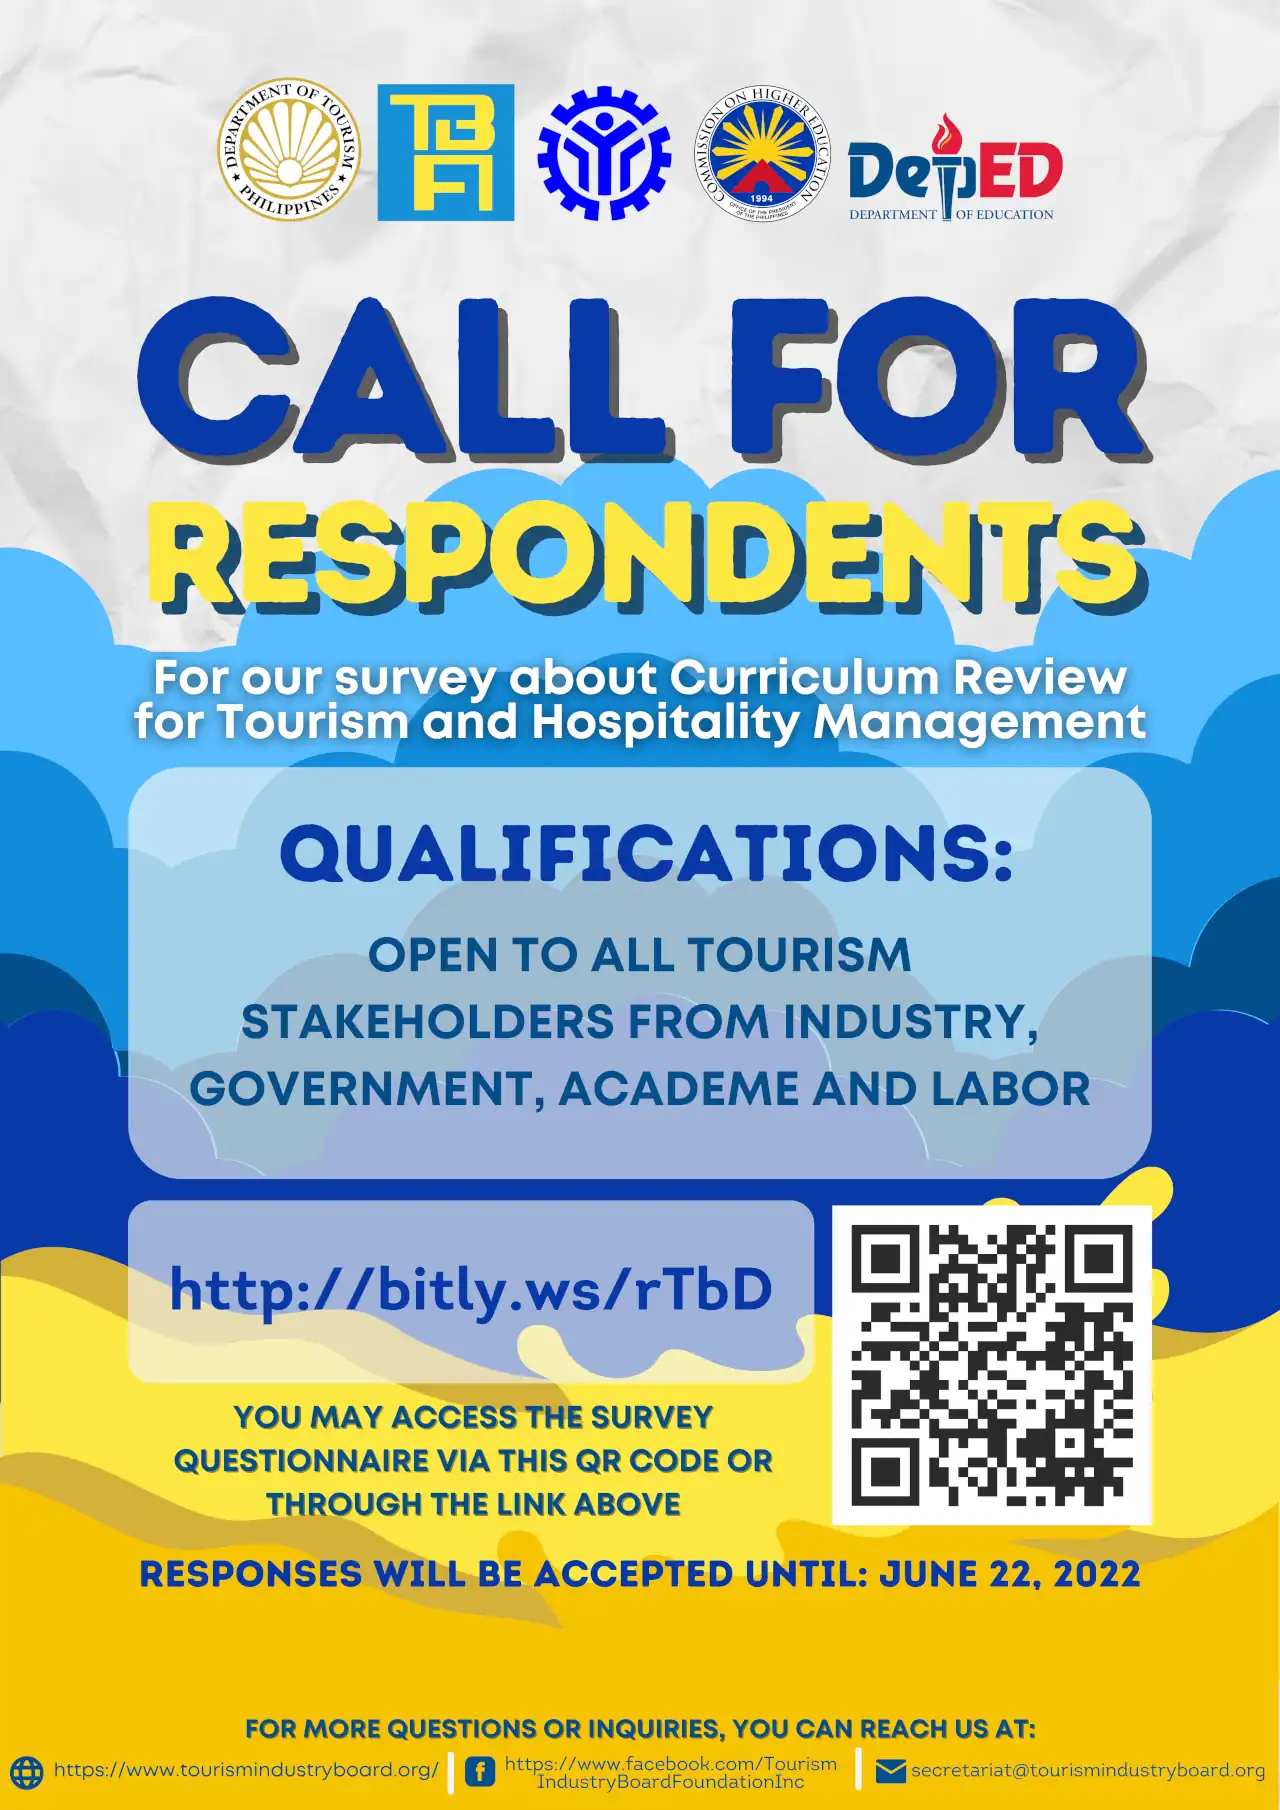 Survey: Curriculum Review for Tourism and Hospitality Management